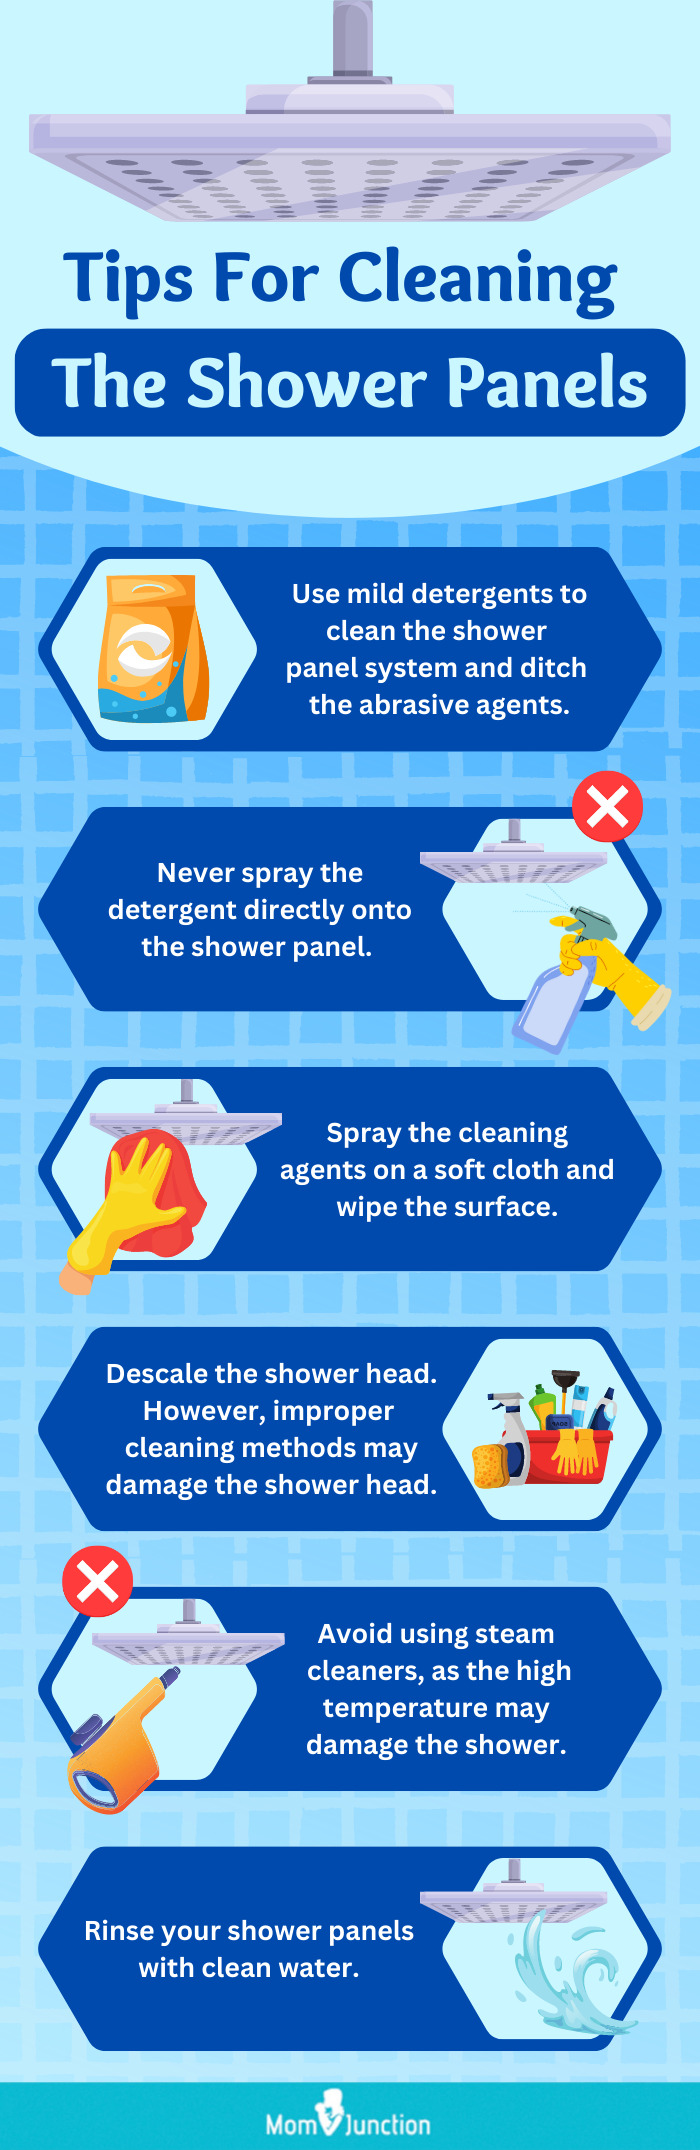 Tips For Cleaning The Shower Panels (infographic)